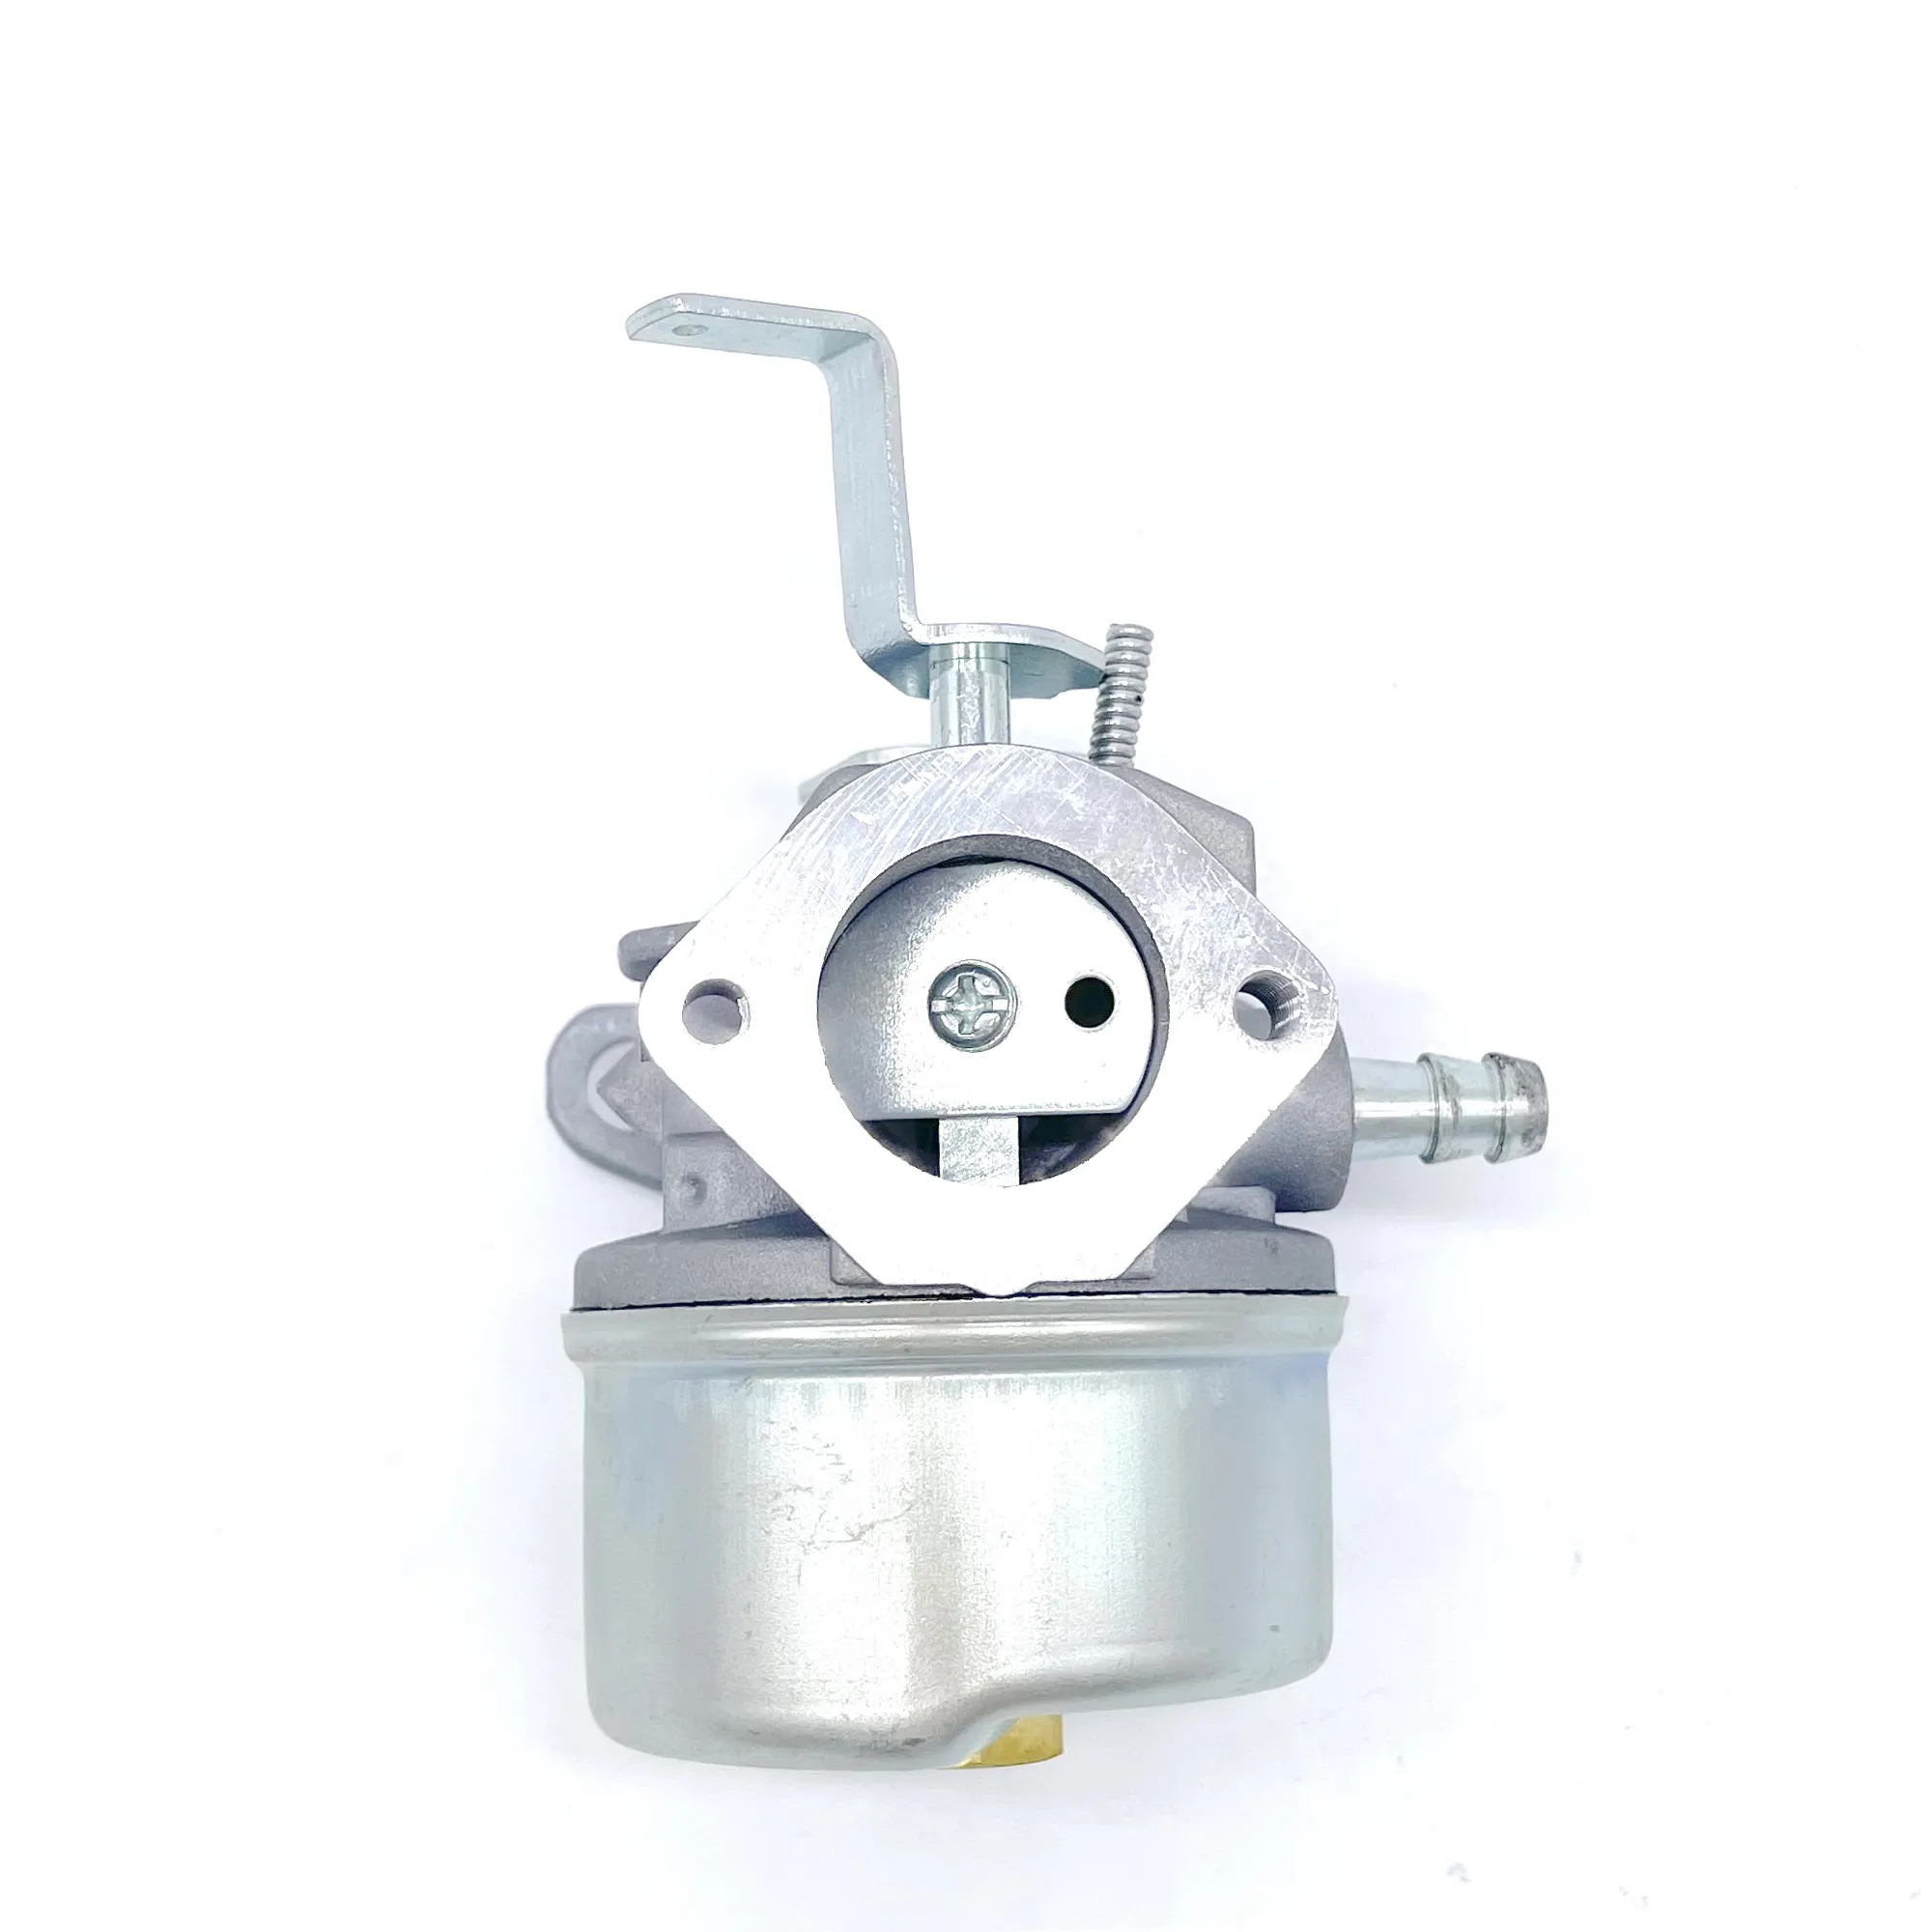 640300 Carburetor Compatible with Tecumseh HSK850 HSK870 TH139SA TH139SP Replaces 632738 640096